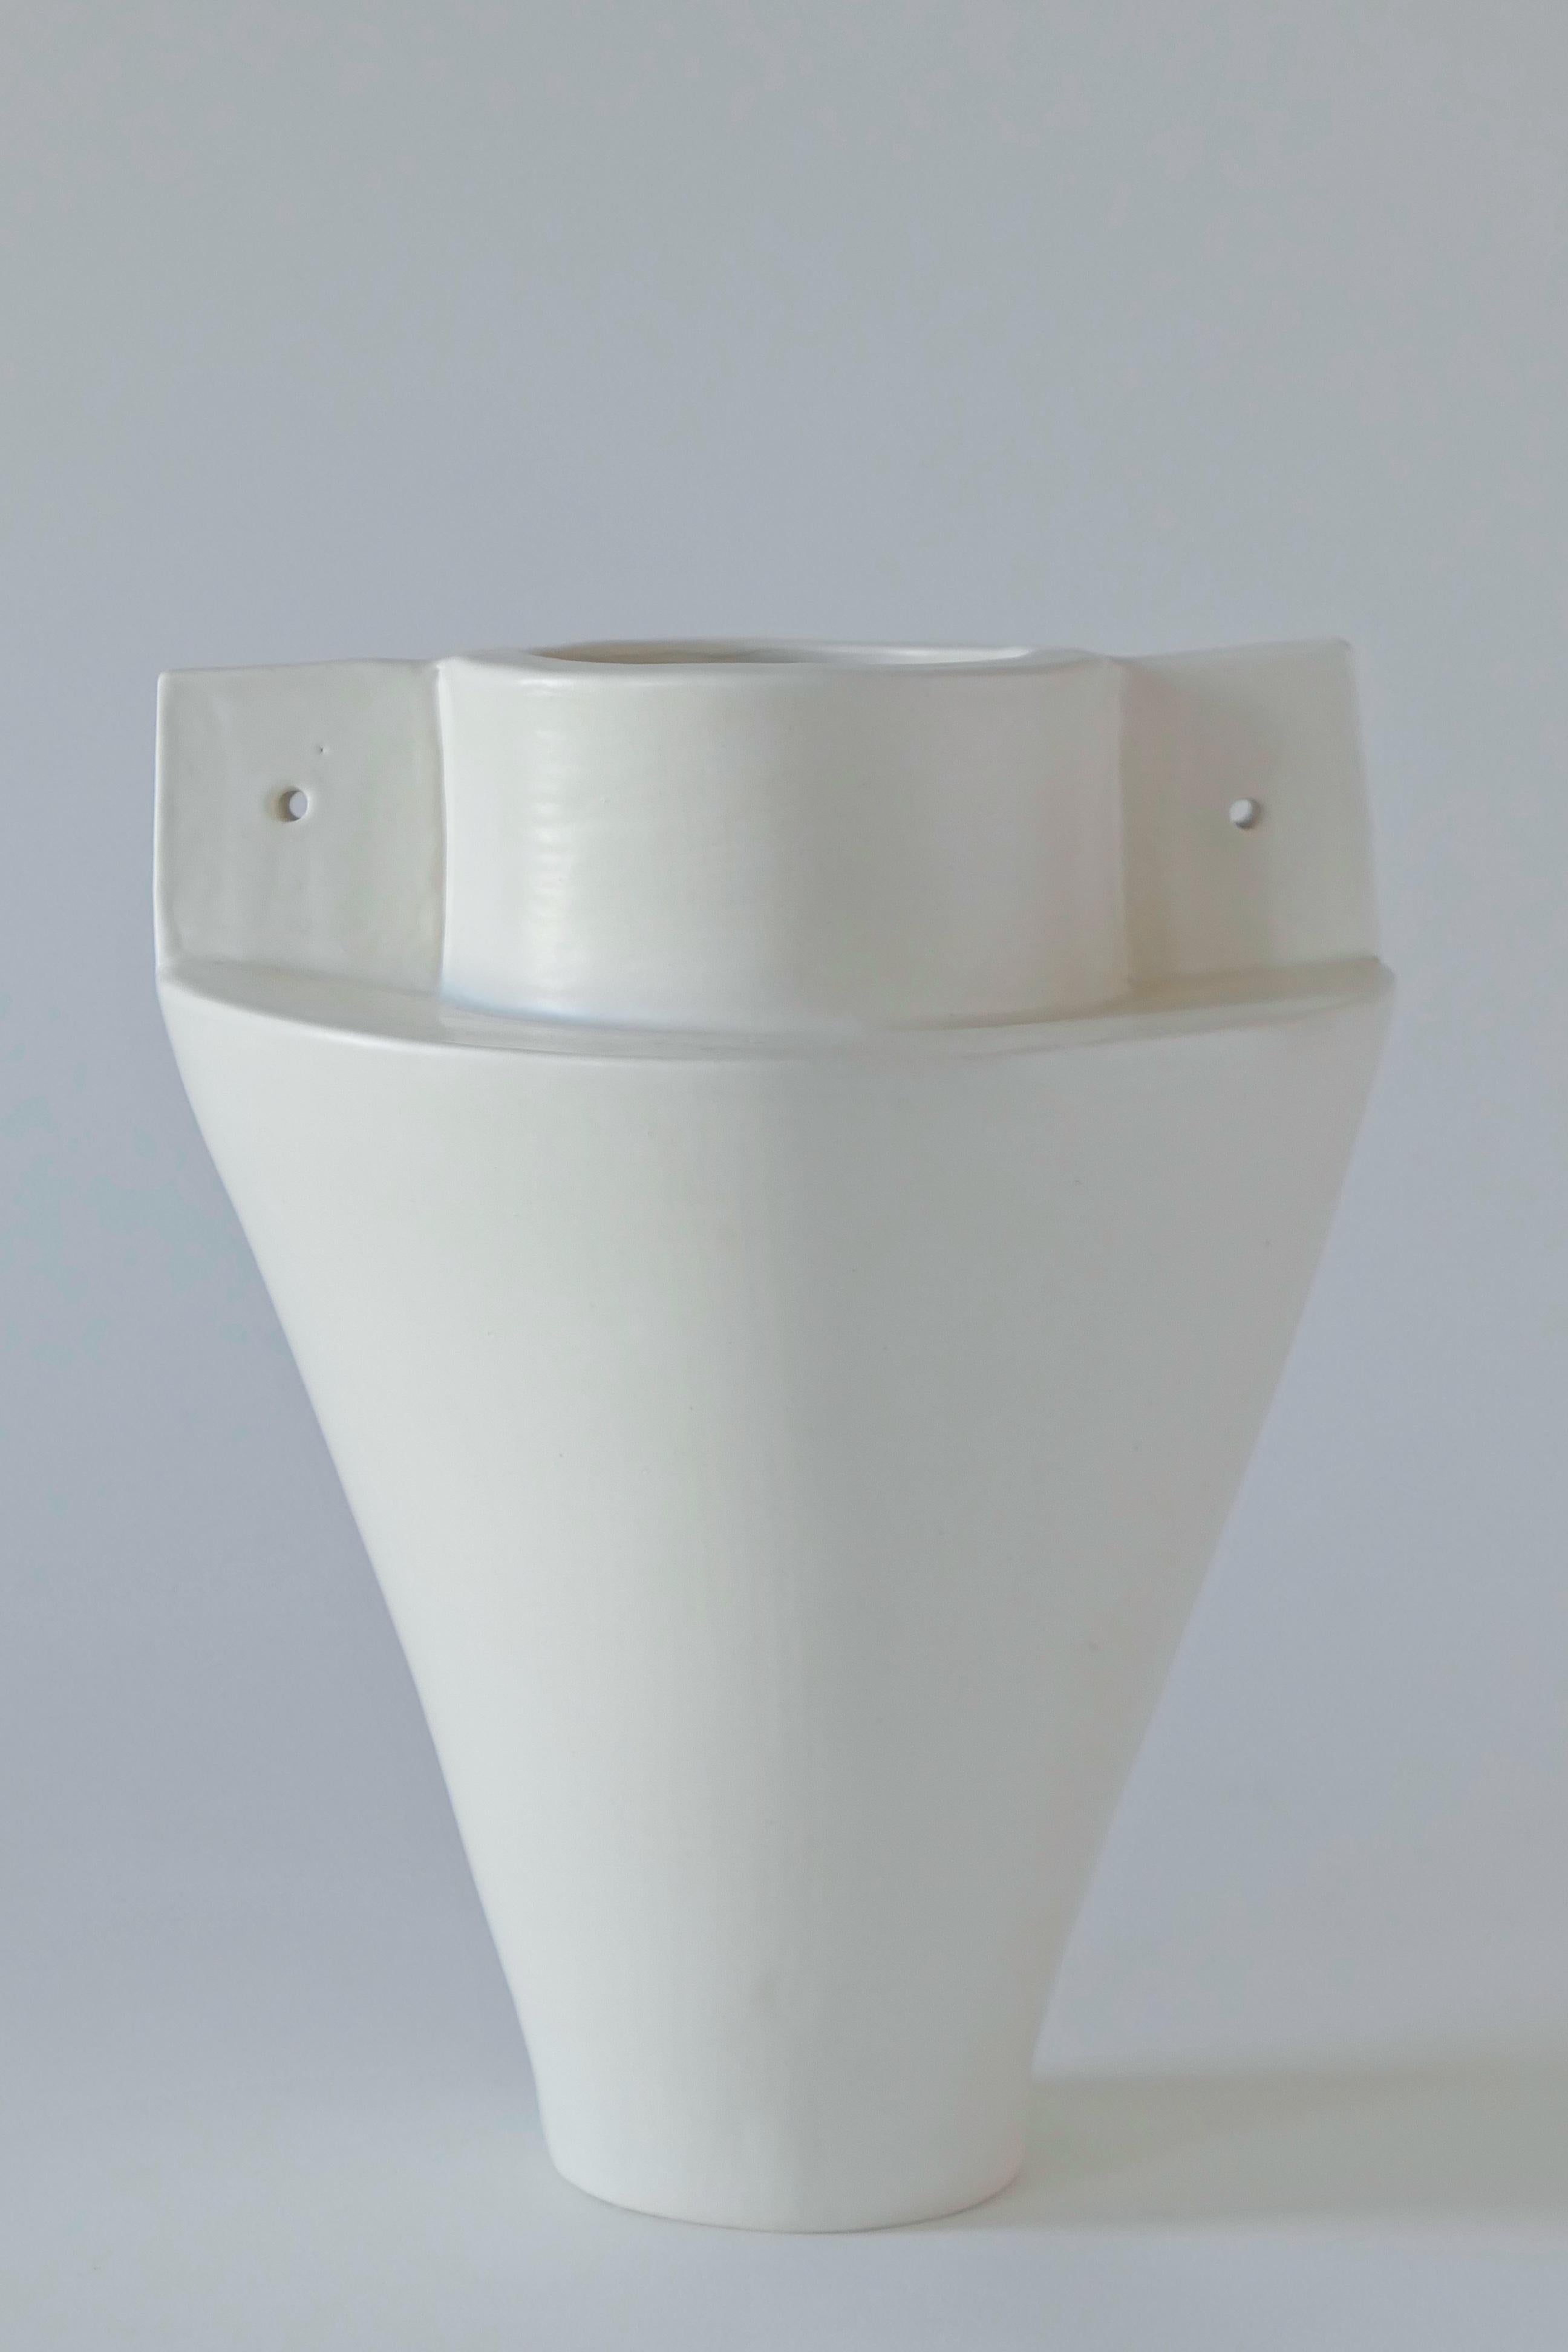 White stoneware vase, finished with a soft, white glaze. This vase is built by hand using clay slabs.

Karina Vieira is a Brooklyn-based ceramicist focusing on handbuilt vessels. 

Her work references various styles, touching on the